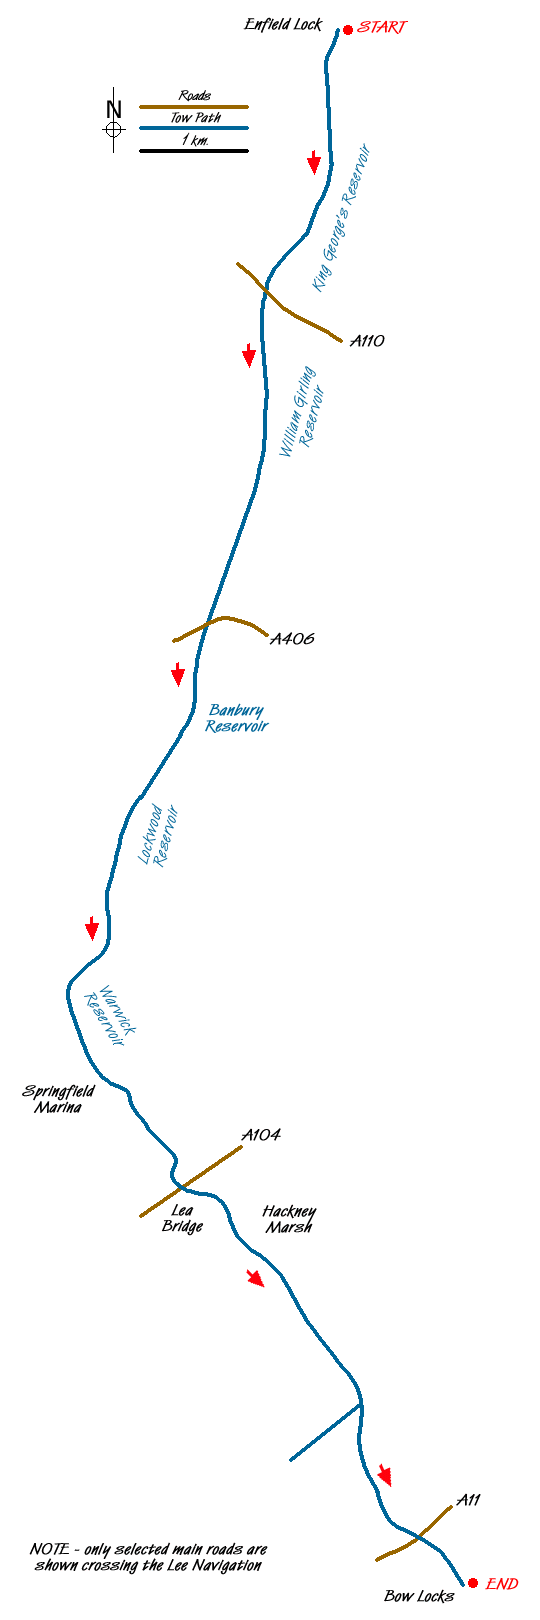 Walk 1940 Route Map